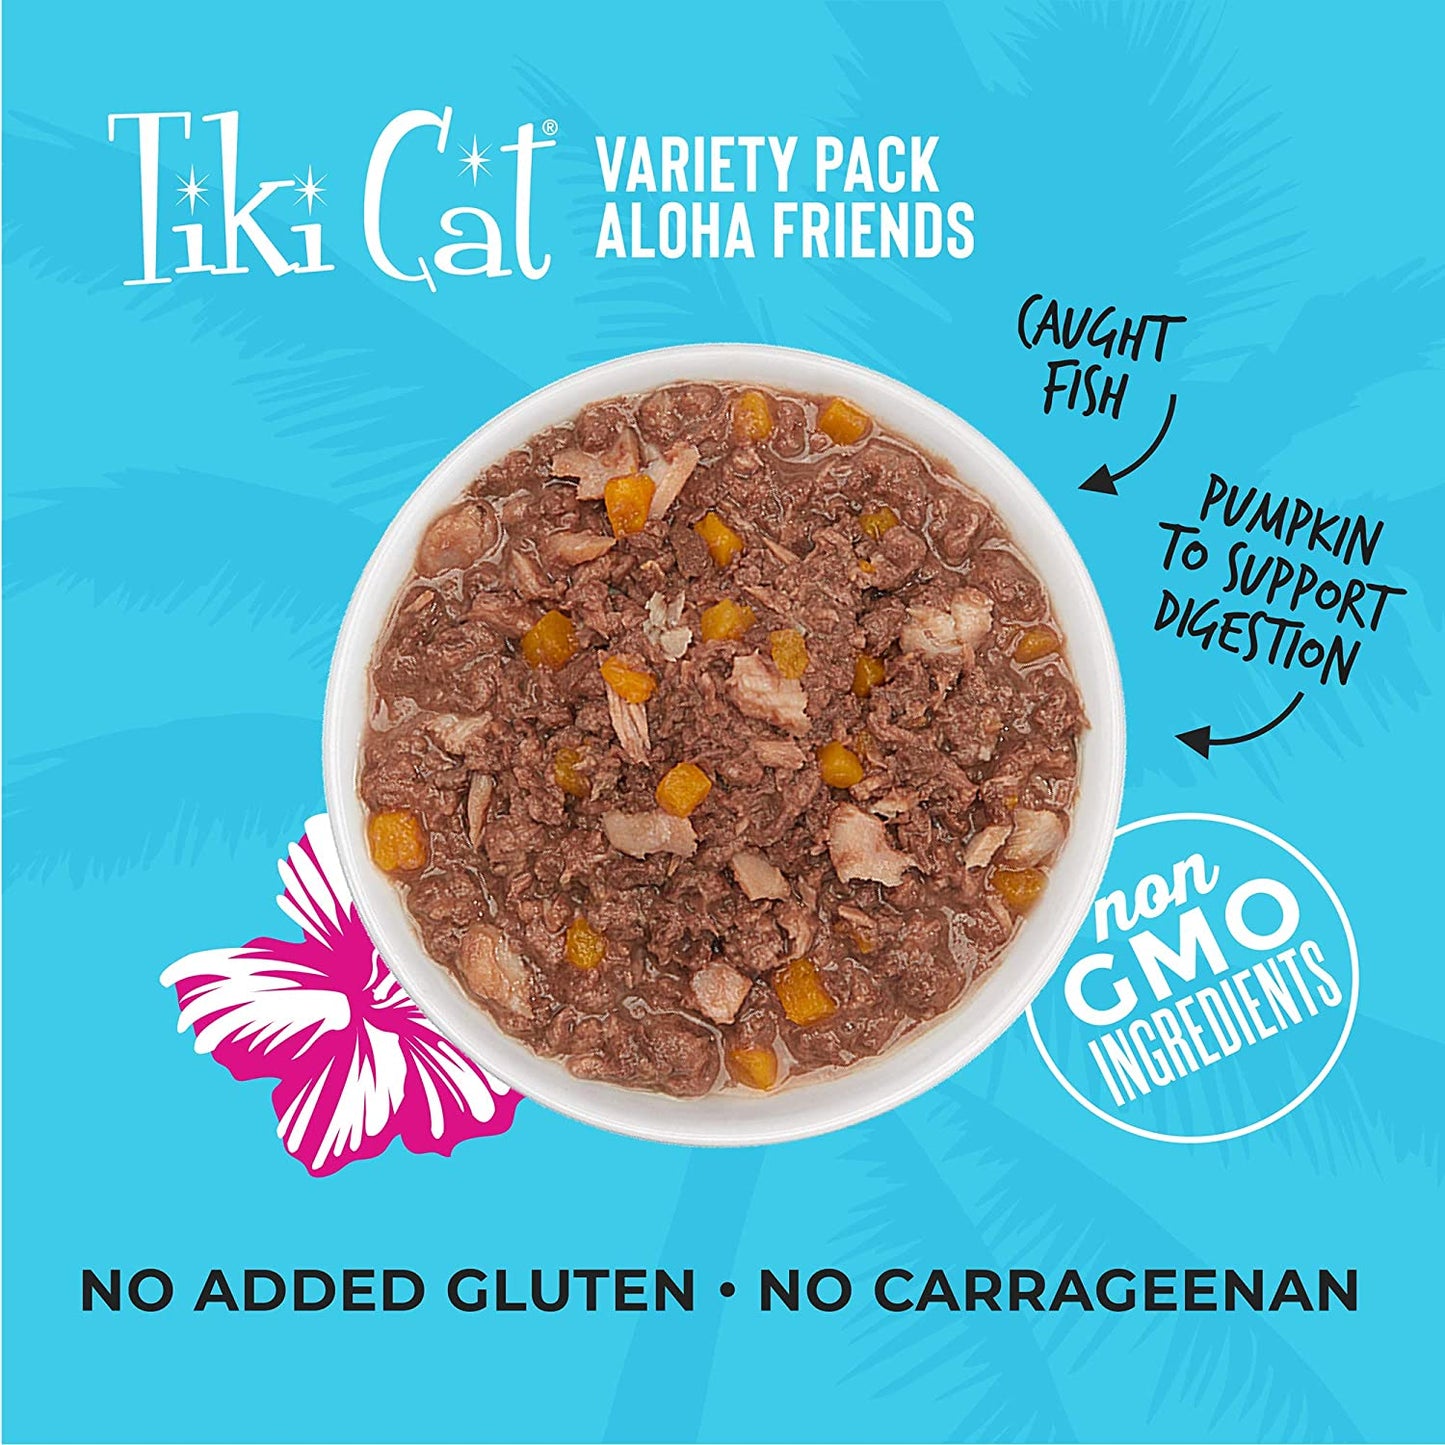 Tiki Cat Aloha Friends Variety Pack, Seafood Flavors with Pumpkin, Wet, High-Protein & High-Moisture Cat Food, For All Life Stages, 3 oz. Cans (Case of 12)